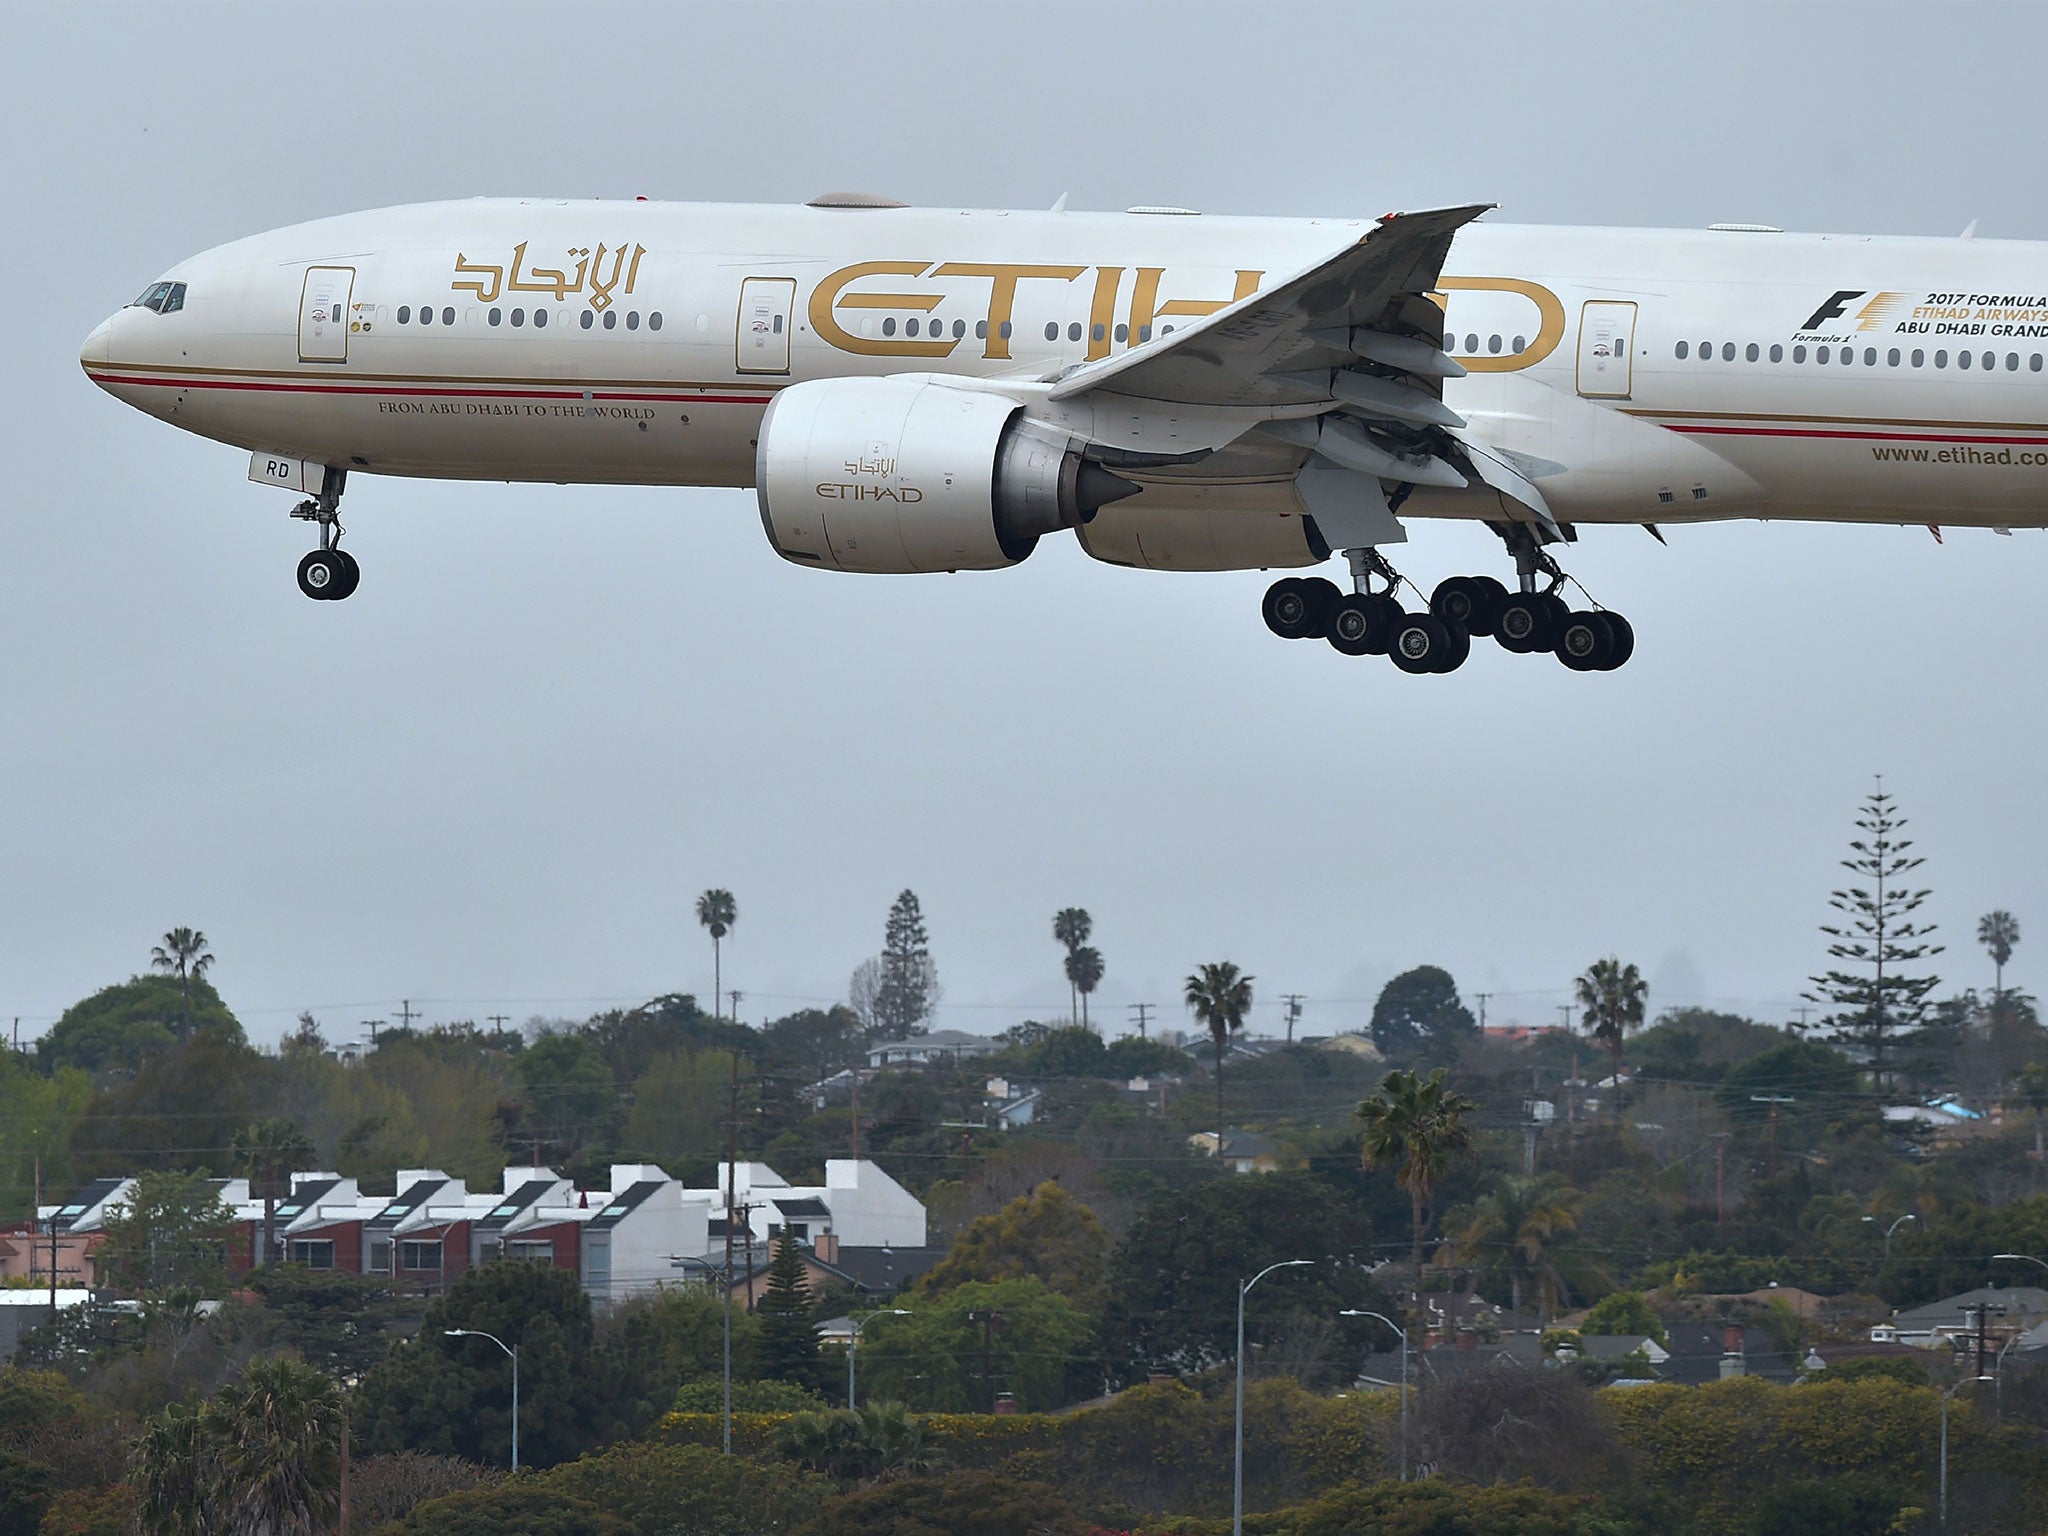 Long-haul carriers Emirates and Etihad did not immediately respond to requests for comment